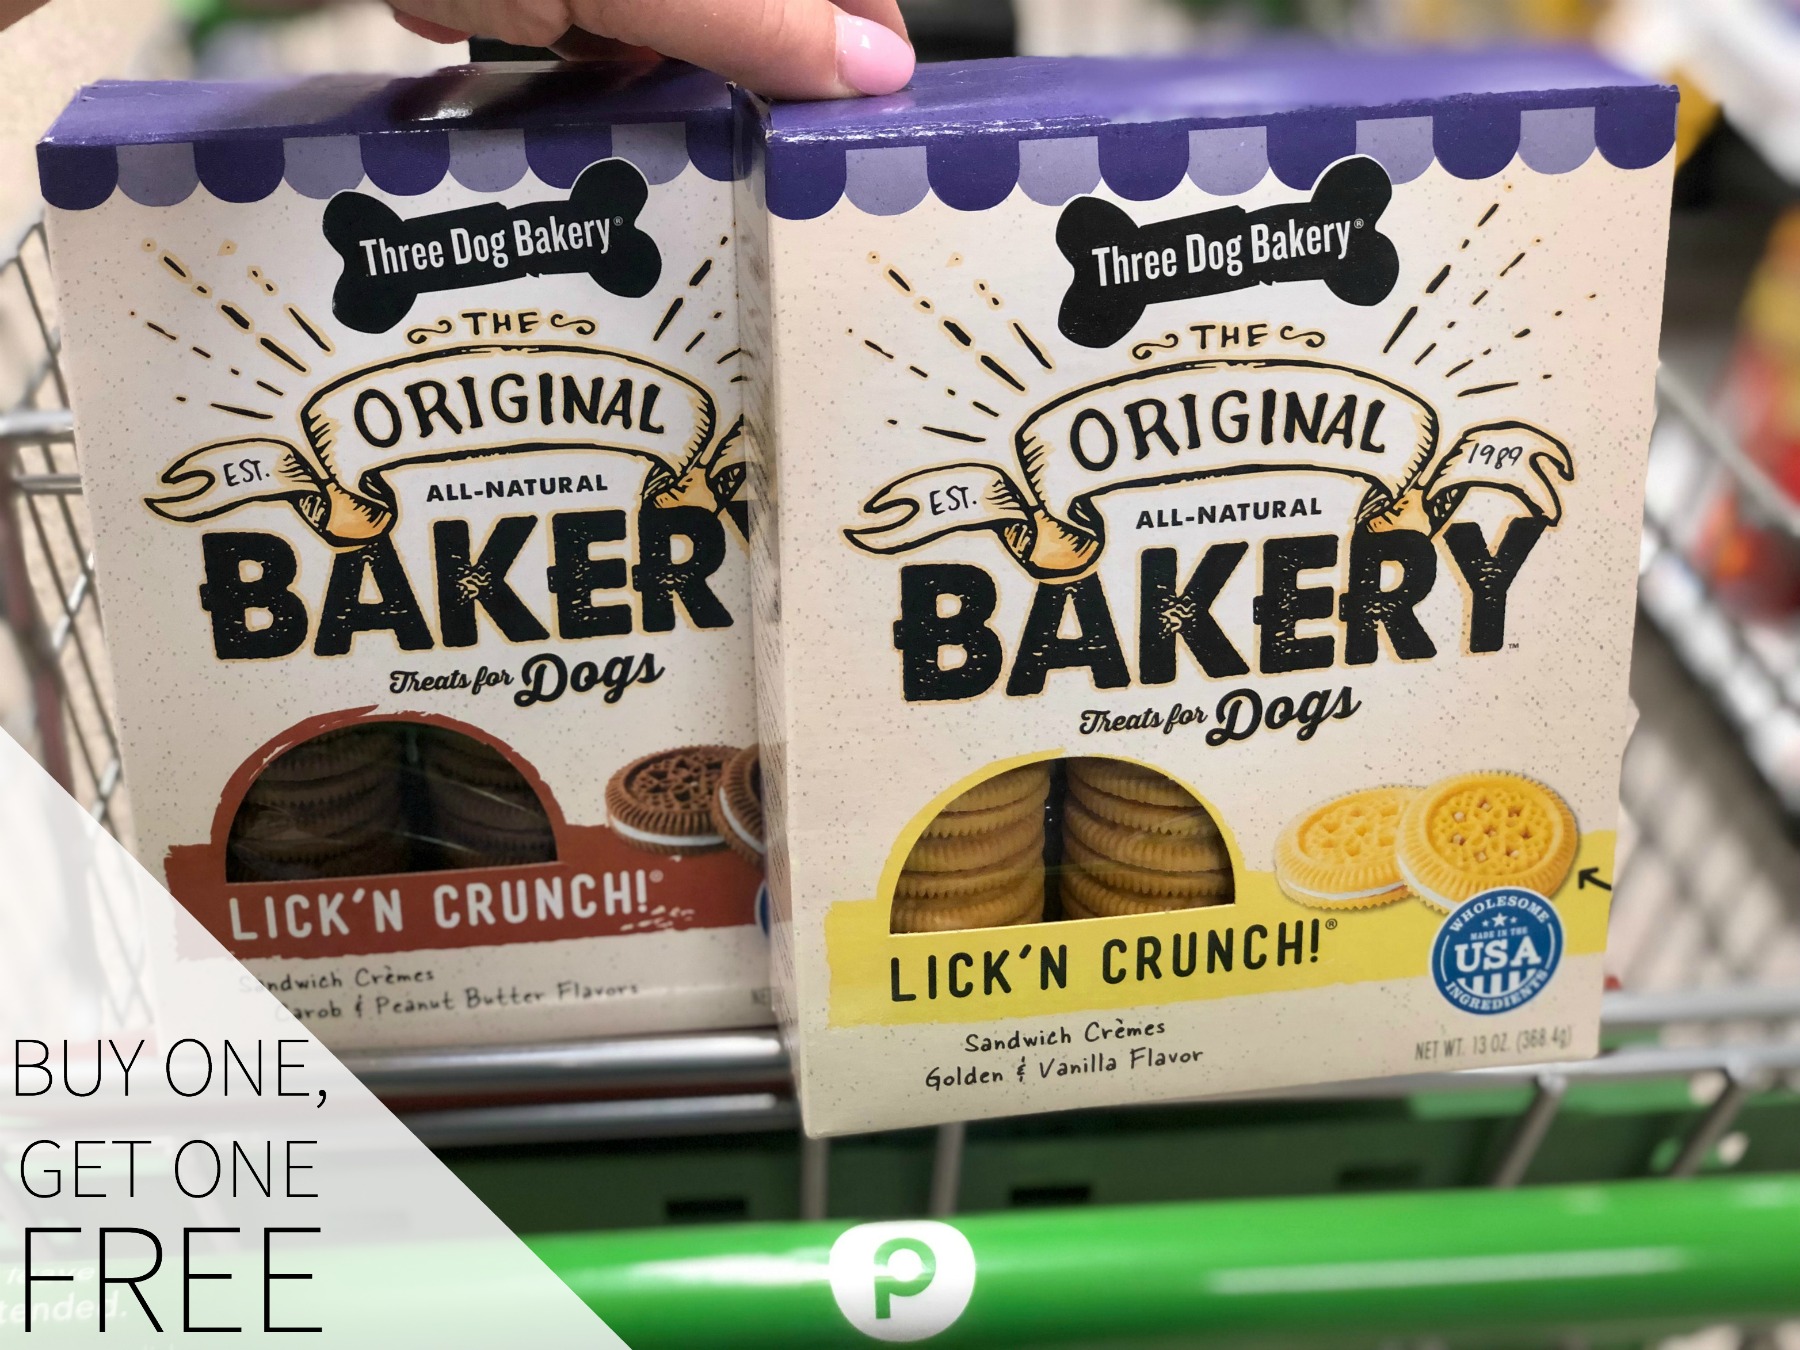 Three Dog Bakery Treats Are Buy One, Get One FREE At Publix (Through 4/24) 1